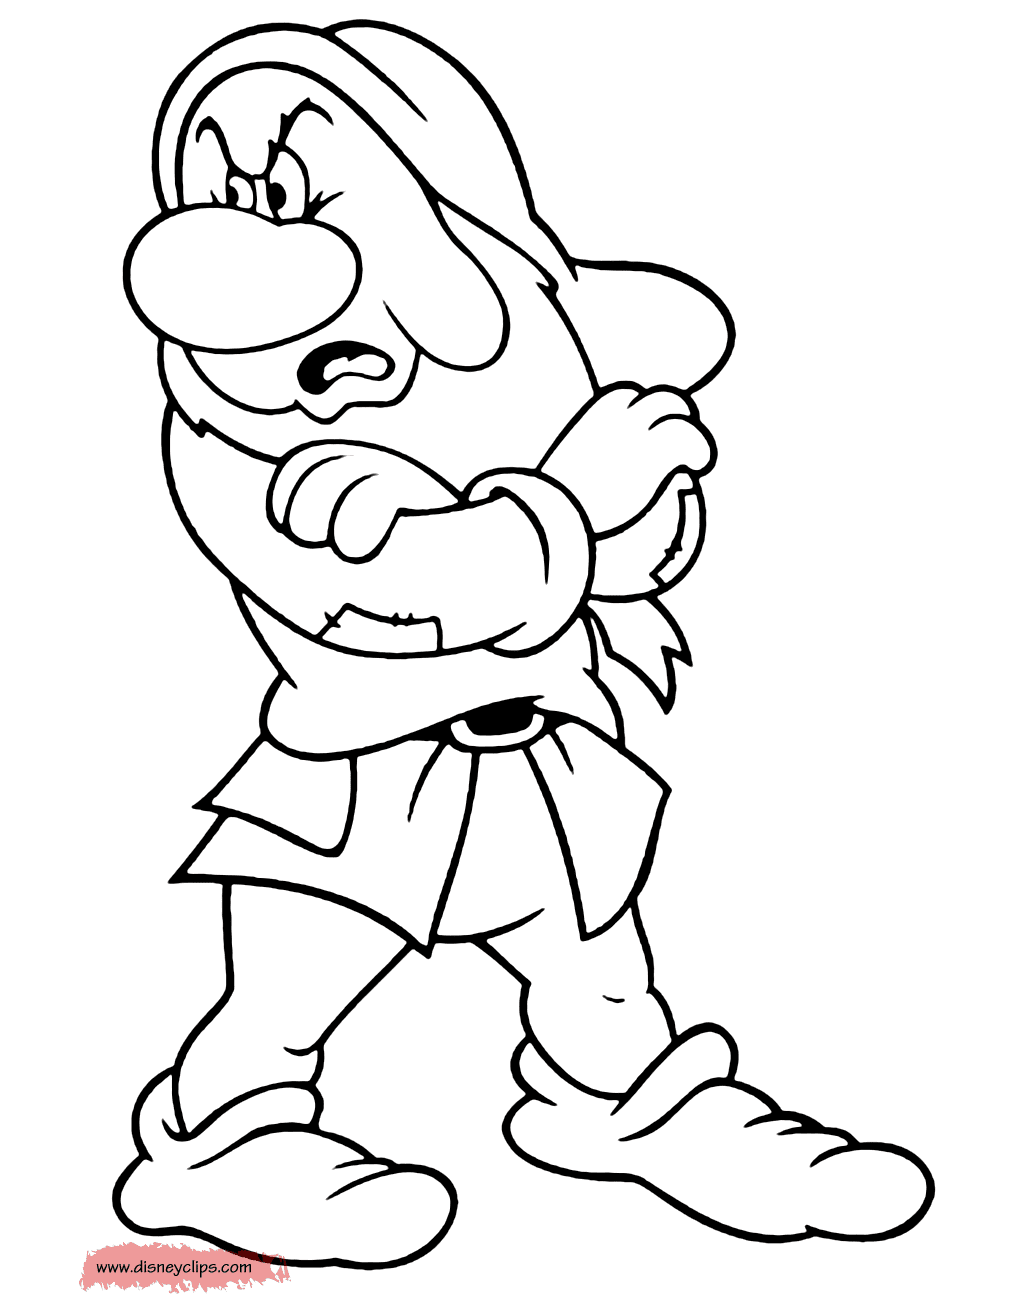 Grumpy standing with crossed arms Coloring Page